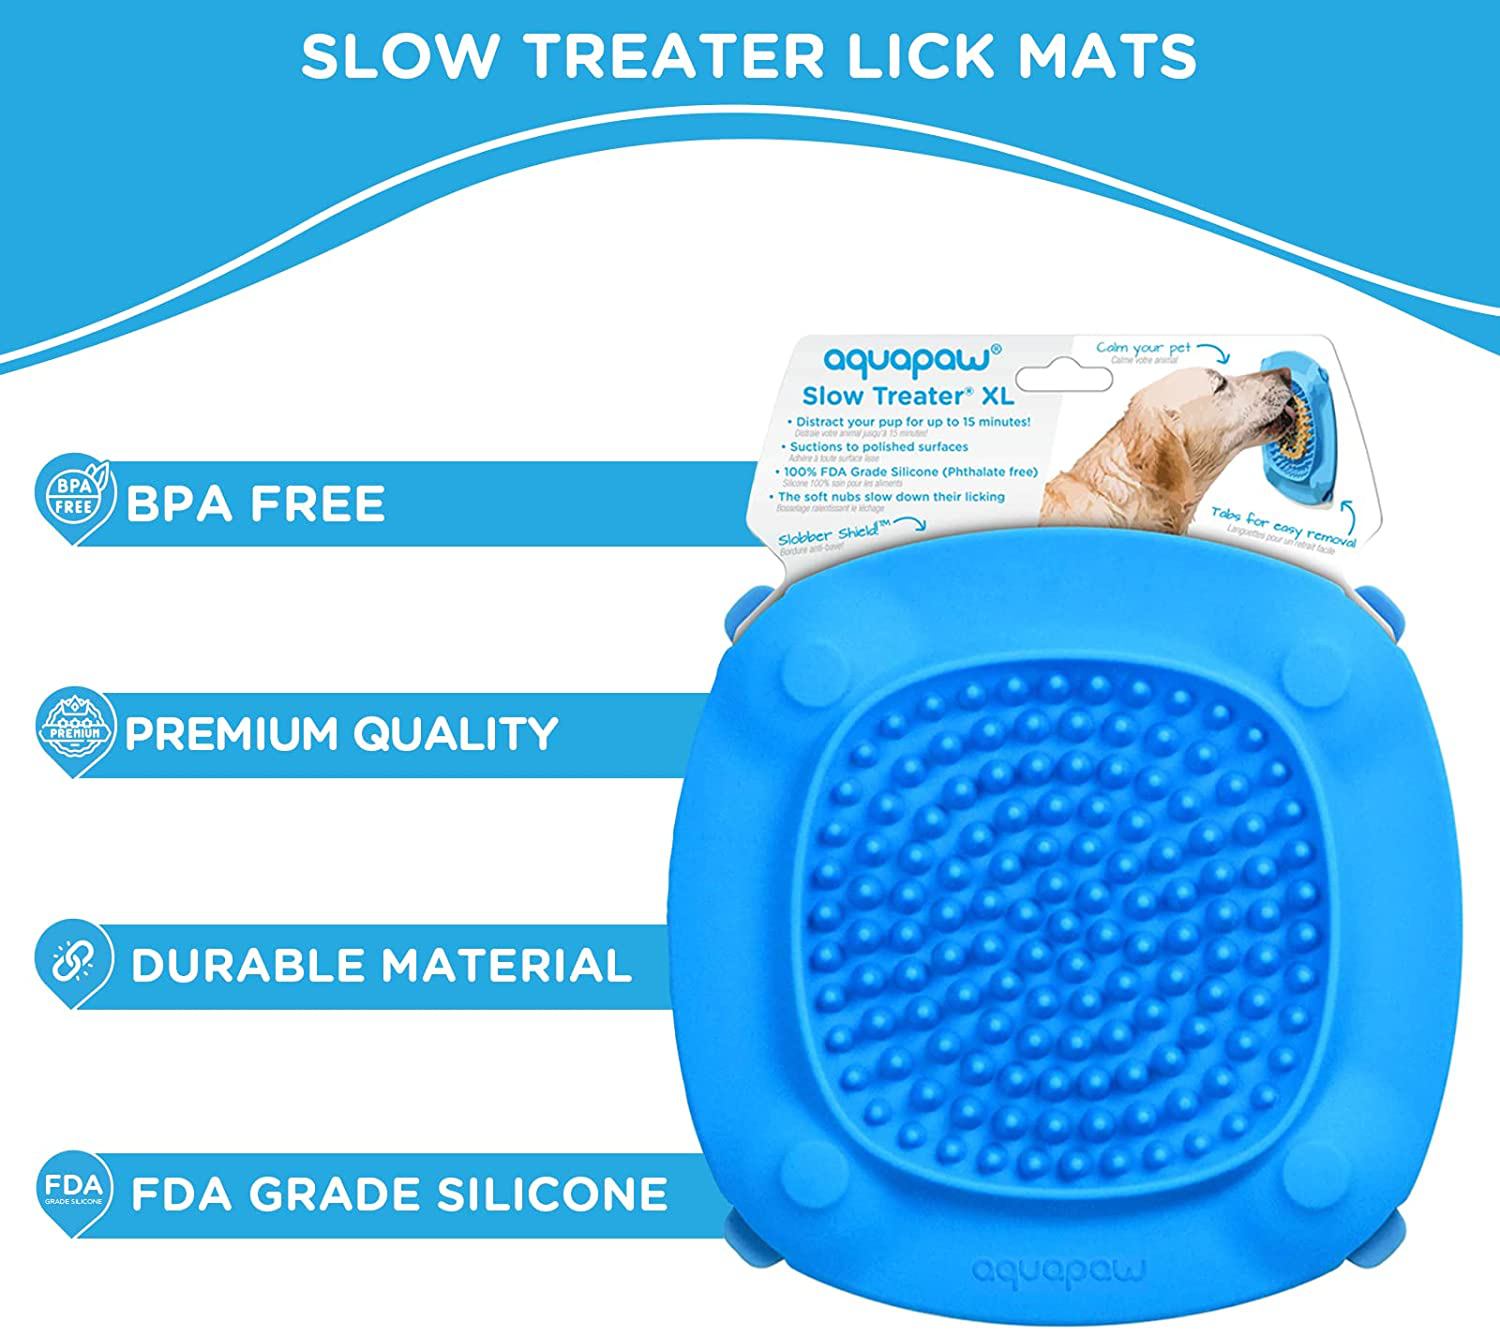 Aquapaw XL Slow Treater Treat-Dispensing Licky Mat – Puzzle Feeder Toy/Licking Pad for Dogs & Other Large Pets, Suctions to Wall/Floor – Relieves Boredom & Anxiety during Grooming, Vet Visits & Storms Animals & Pet Supplies > Pet Supplies > Dog Supplies > Dog Kennels & Runs Aquapaw   